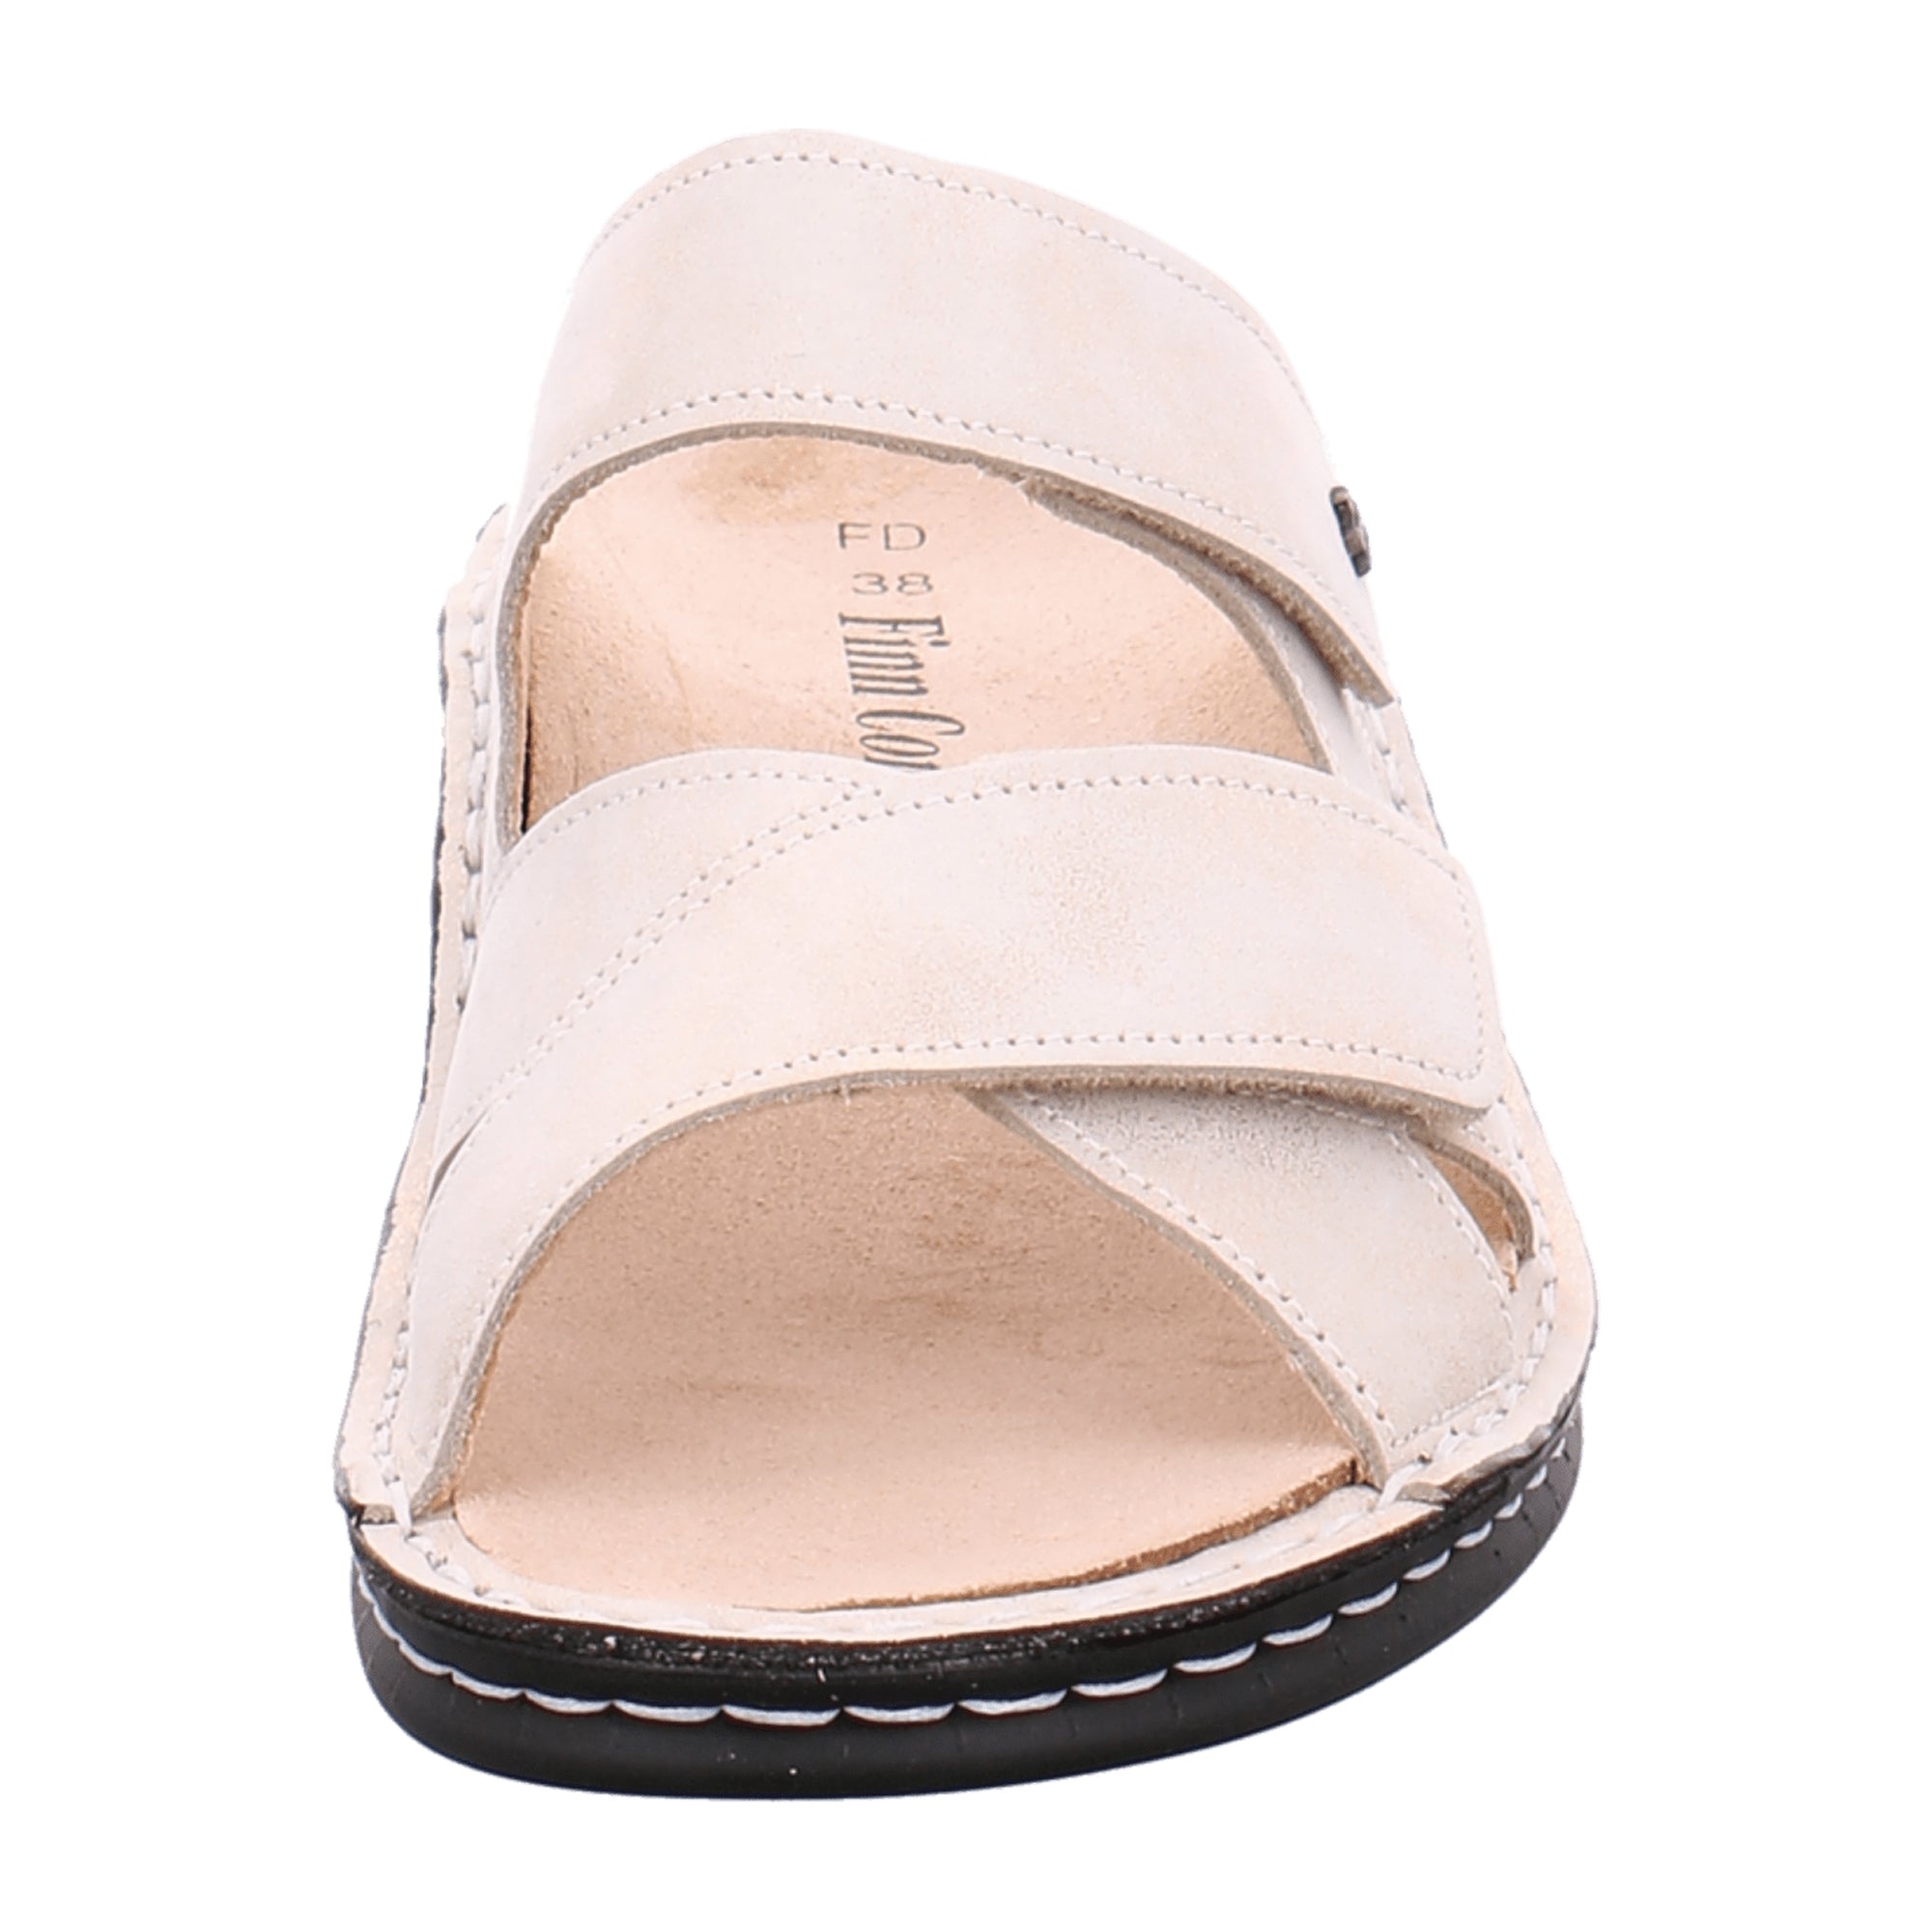 Finn Comfort Melrose Women's Comfortable Shoes - Stylish Beige Leather